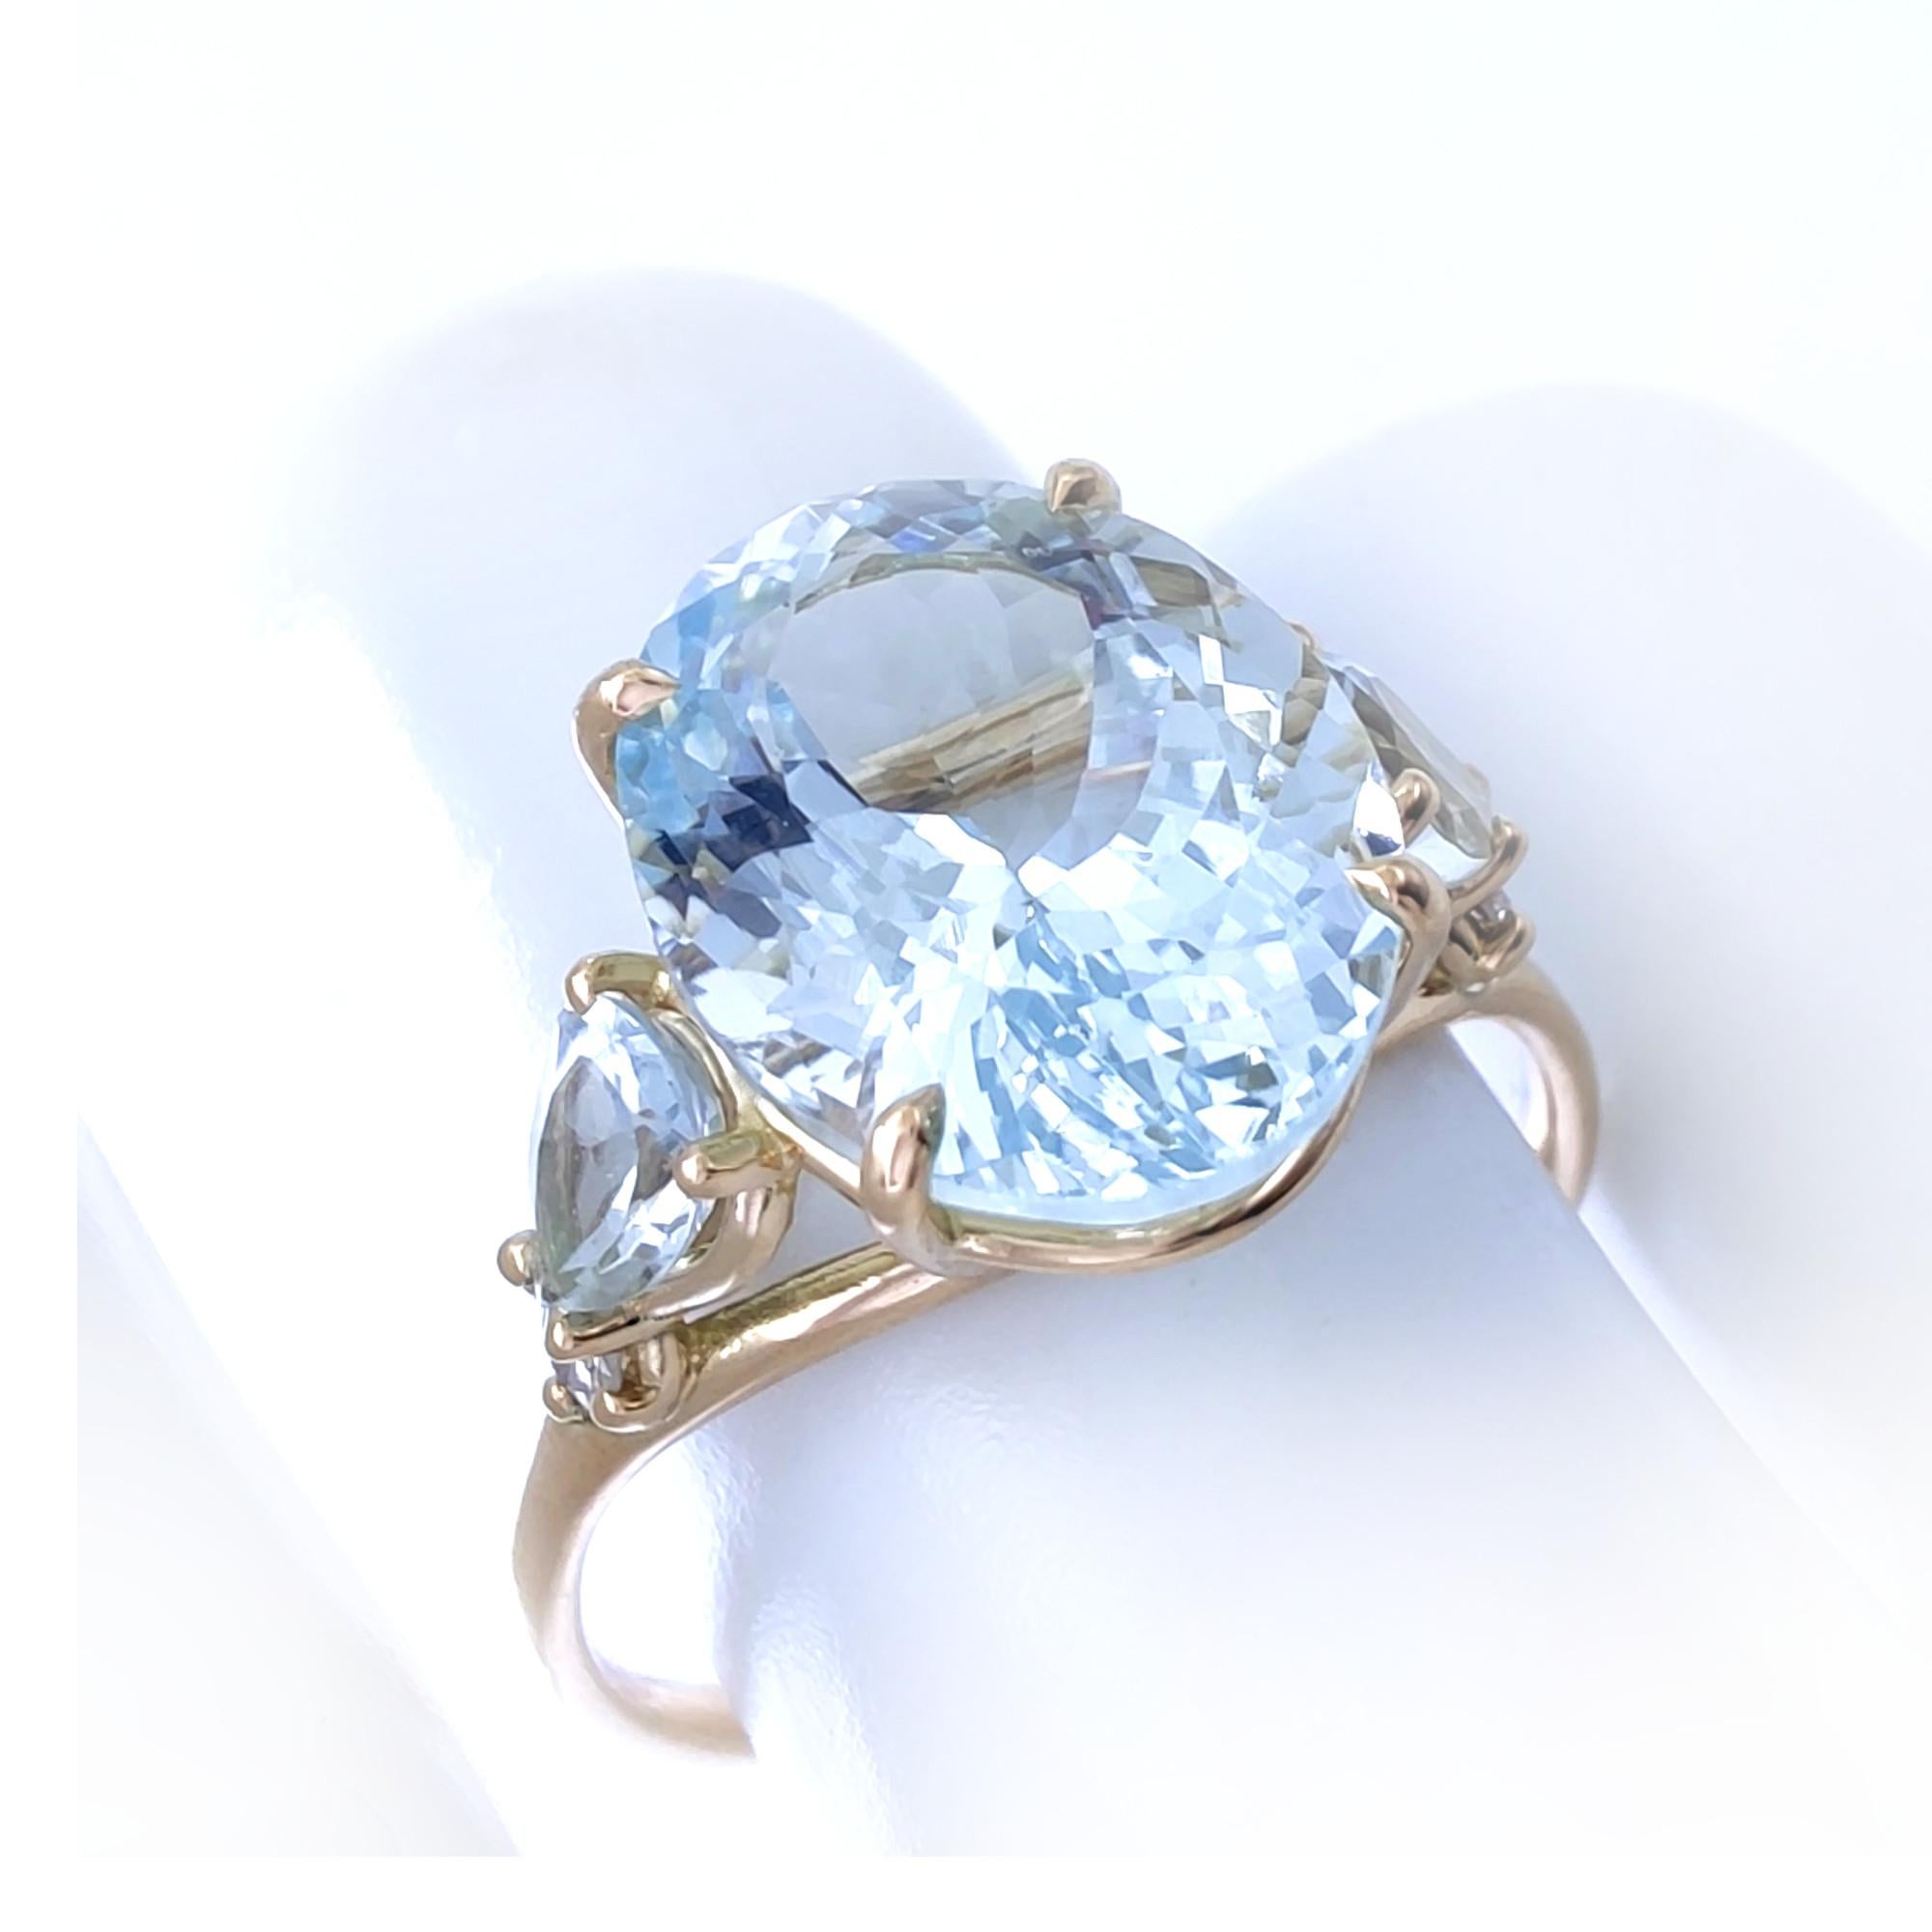 4.3ct  Oval Cut  Aquamarine  Ring, 18k Yellow Gold, with diamonds  For Sale 6